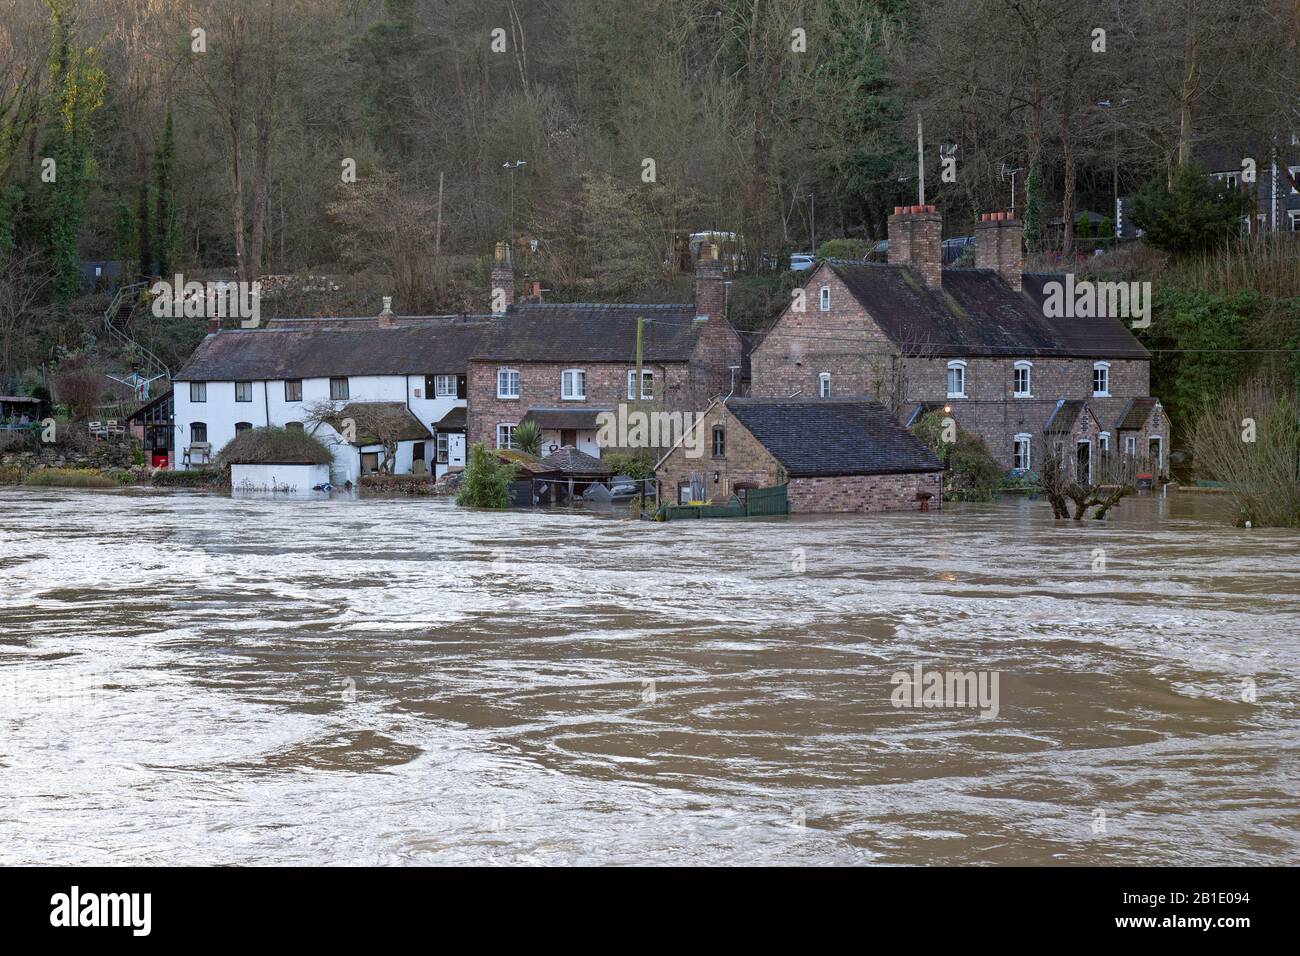 Properties in the Ironbridge Gorge World Heritage Site in Shropshire, England, are once again being flooded, as the River Severn bursts its banks. River levels are predicted to exceed previous highsm and remain high for a couple of days. Stock Photo